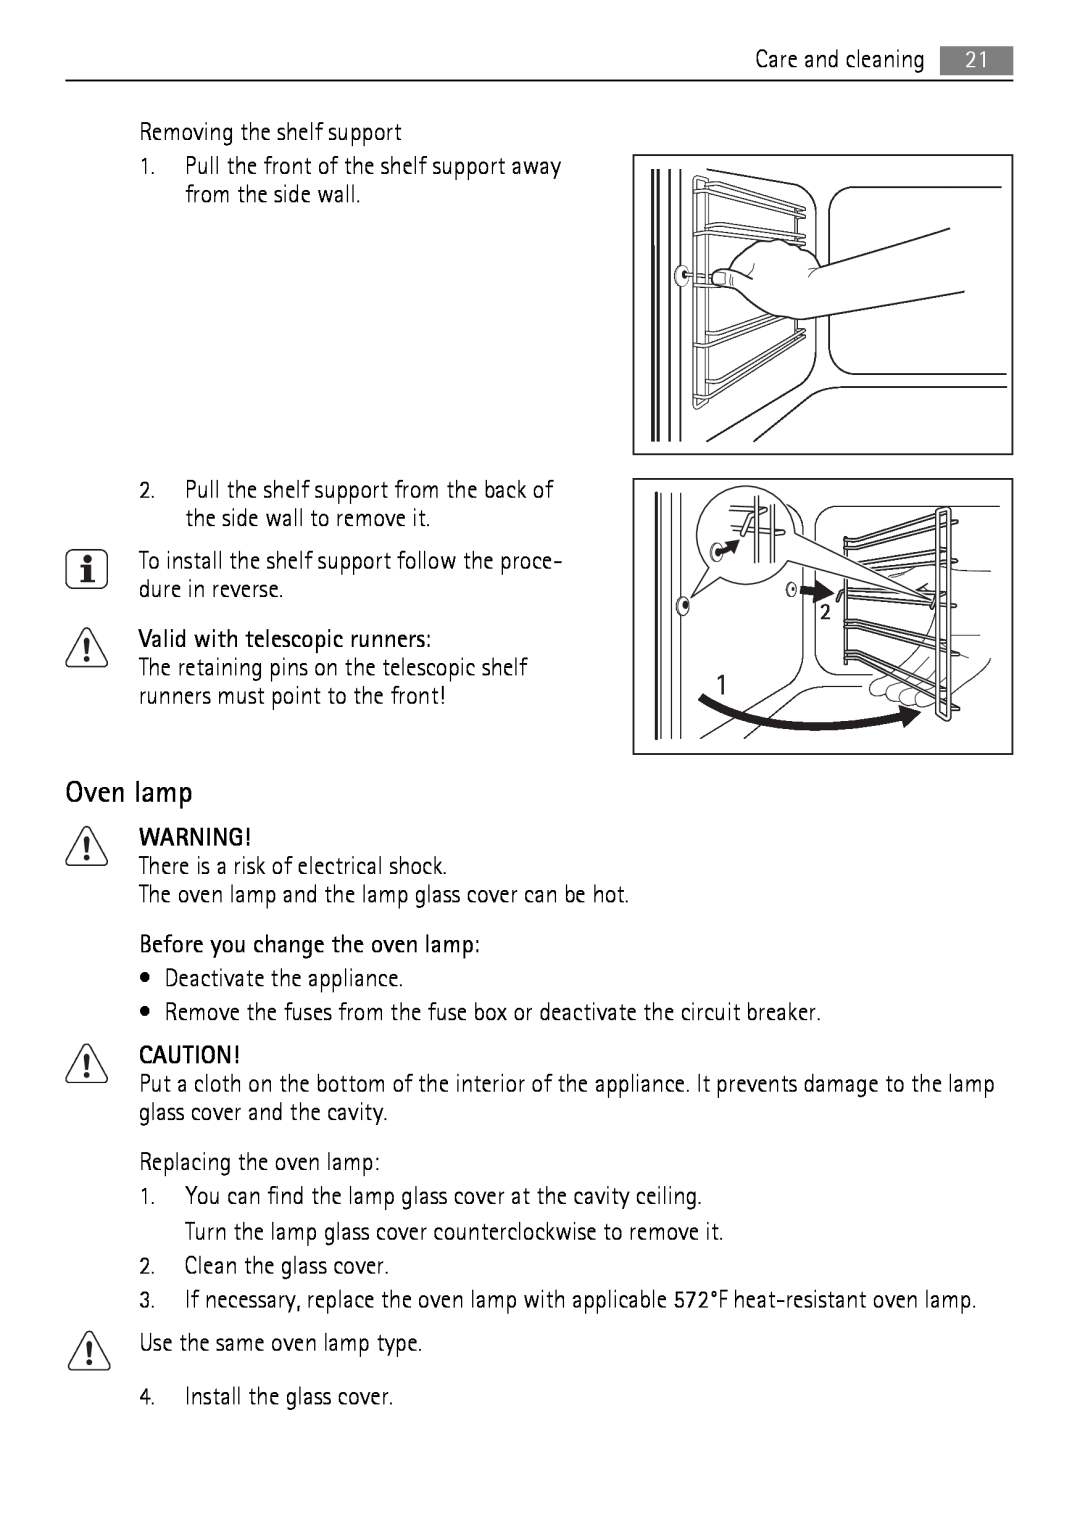 AEG BC3000001 user manual Oven lamp, Removing the shelf support 